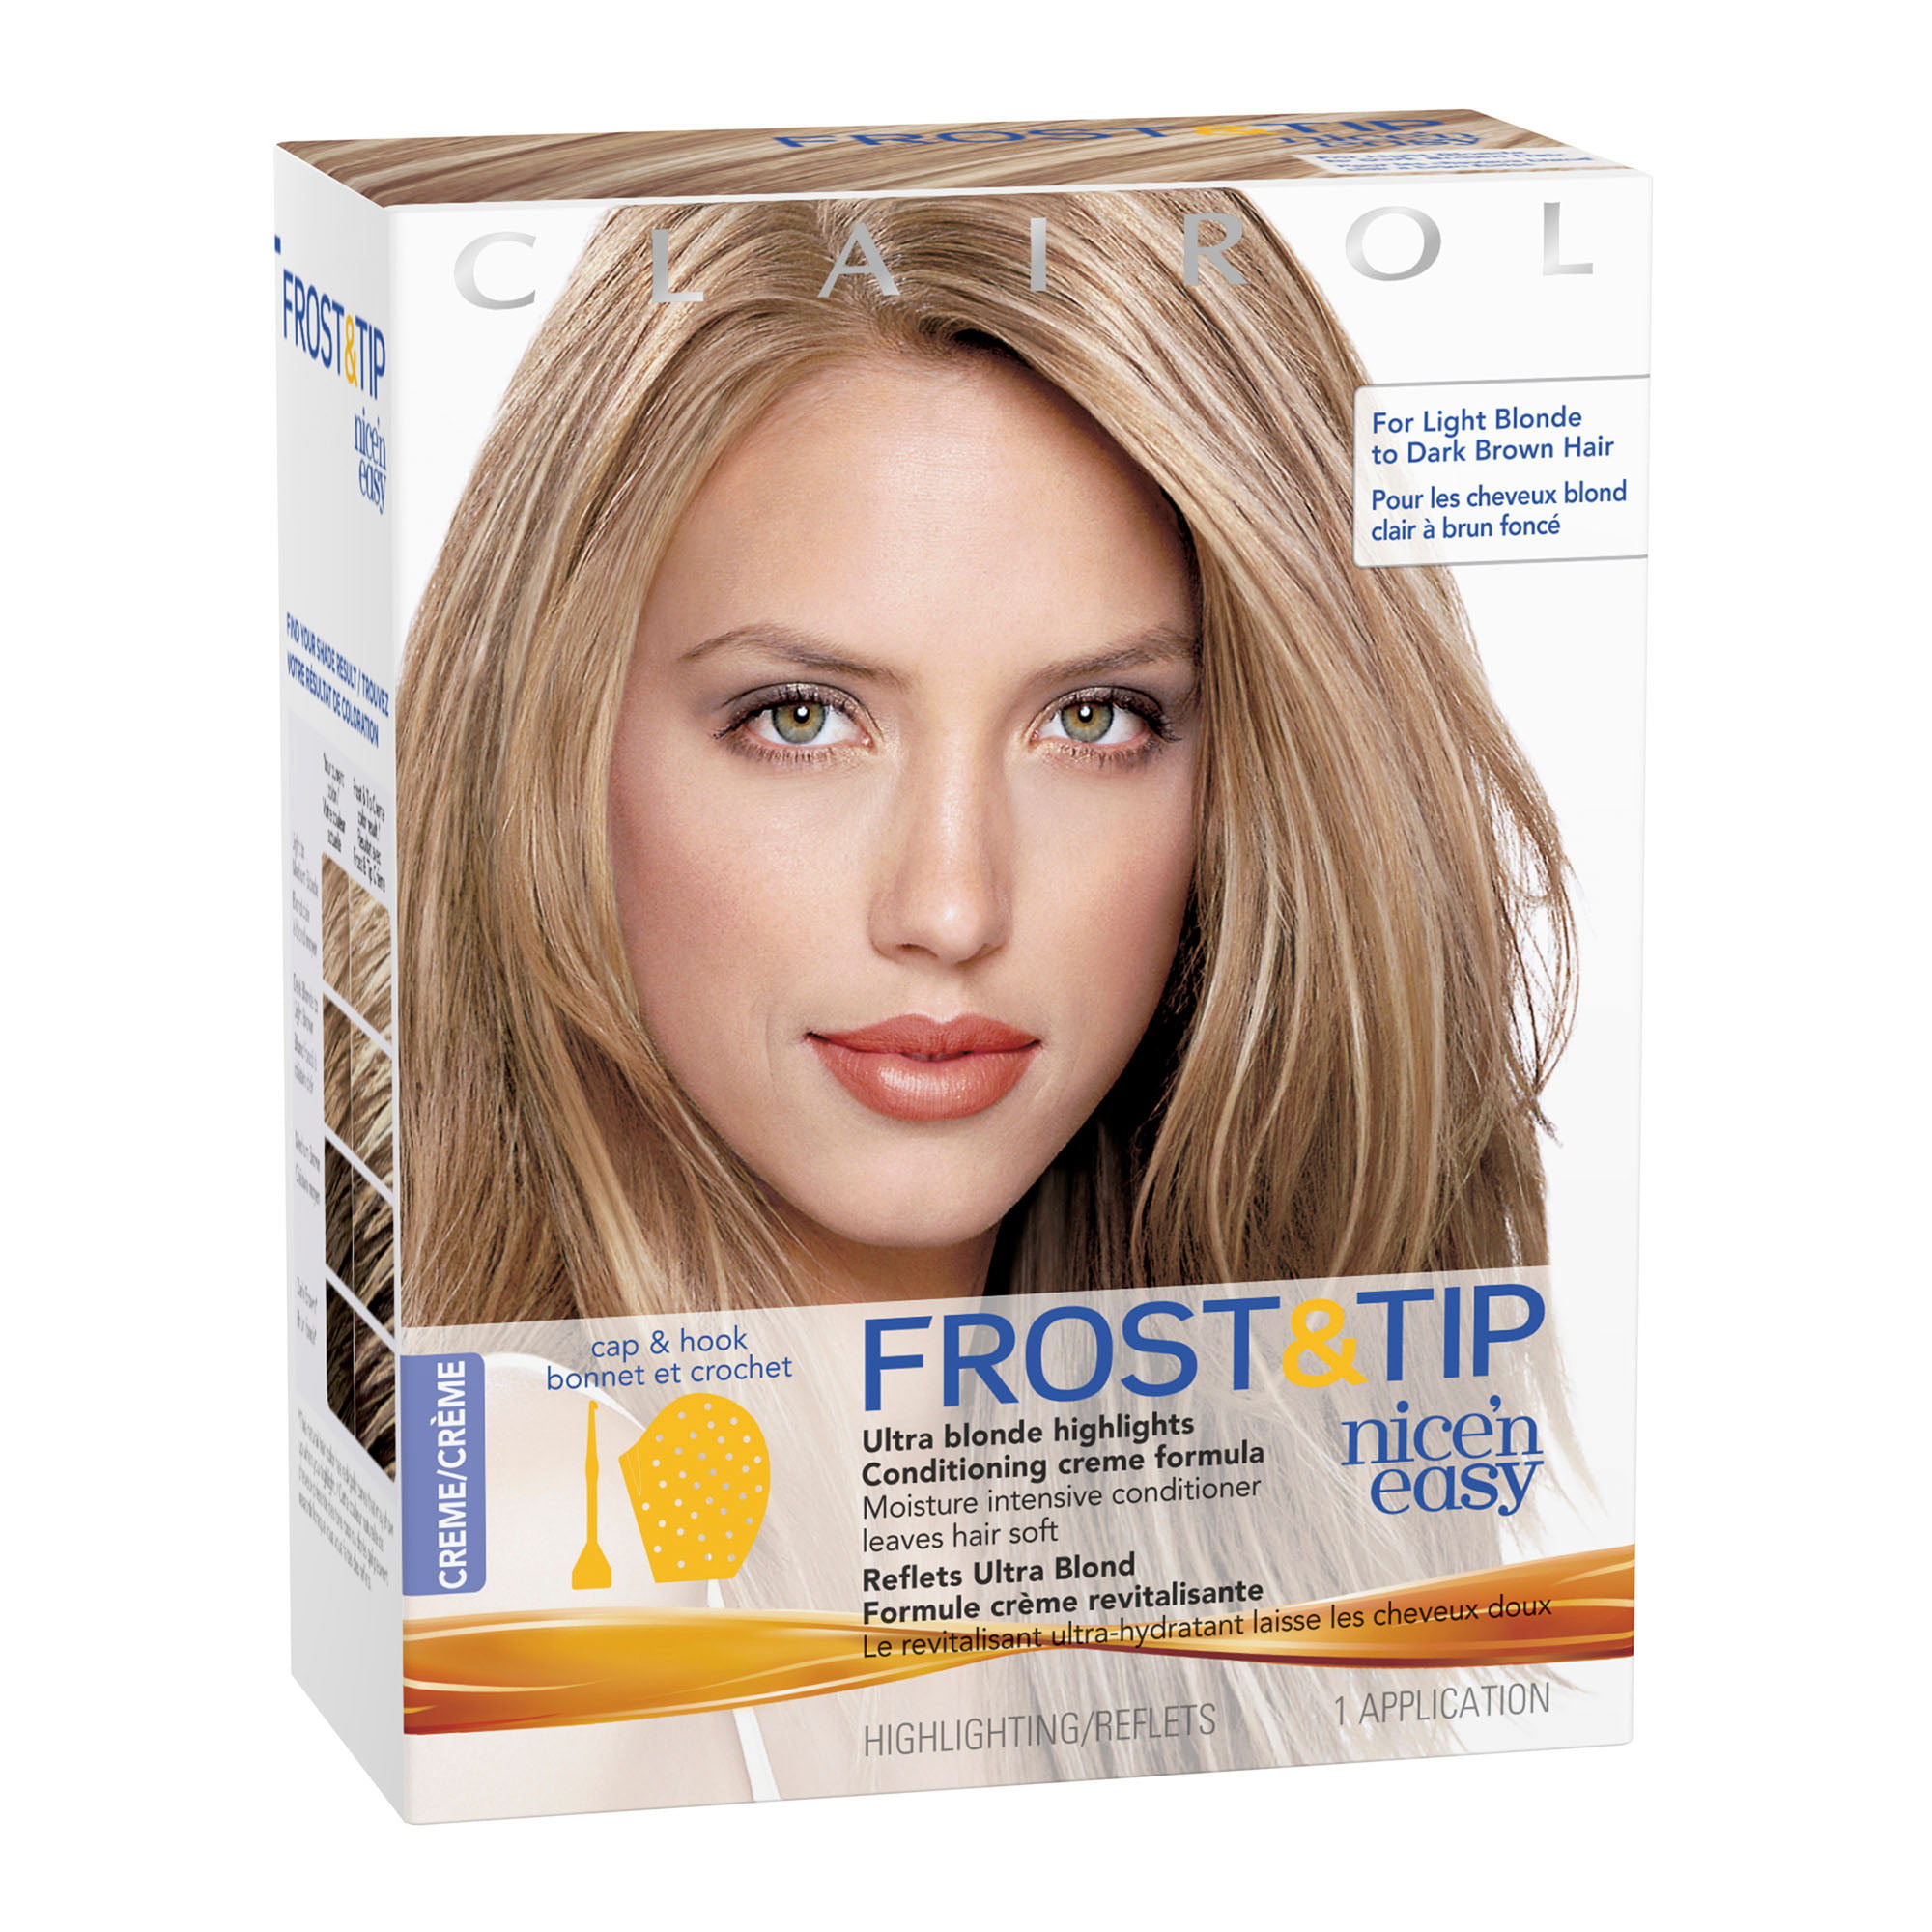 Clairol nice 'n easy frost & tip hair highlights creme kit 